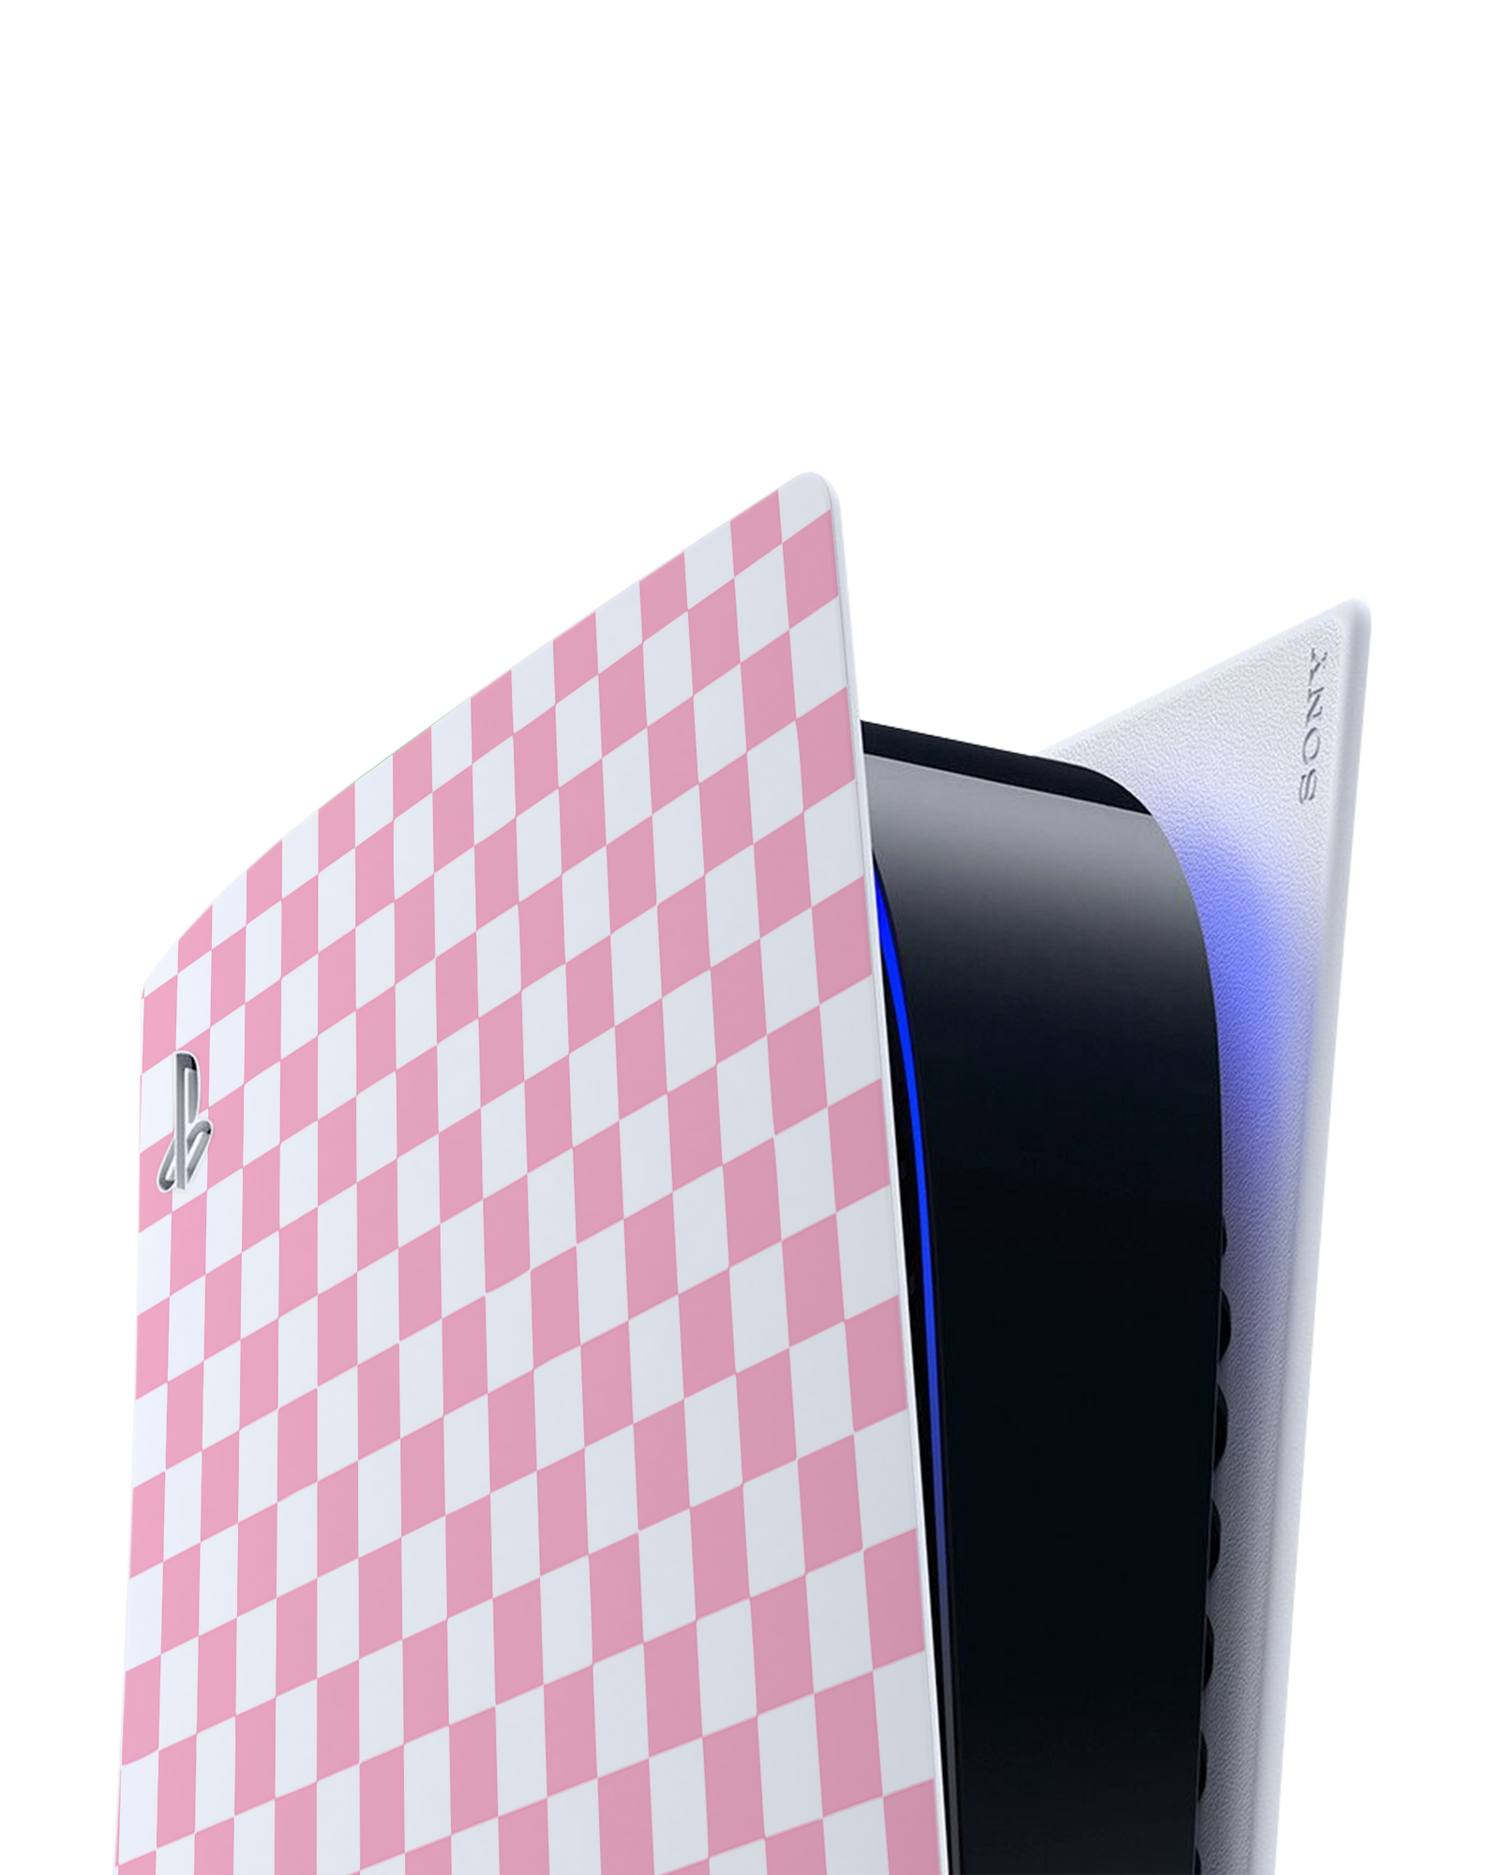 Pink Checkerboard Console Skin for Sony PlayStation 5: Detail shot